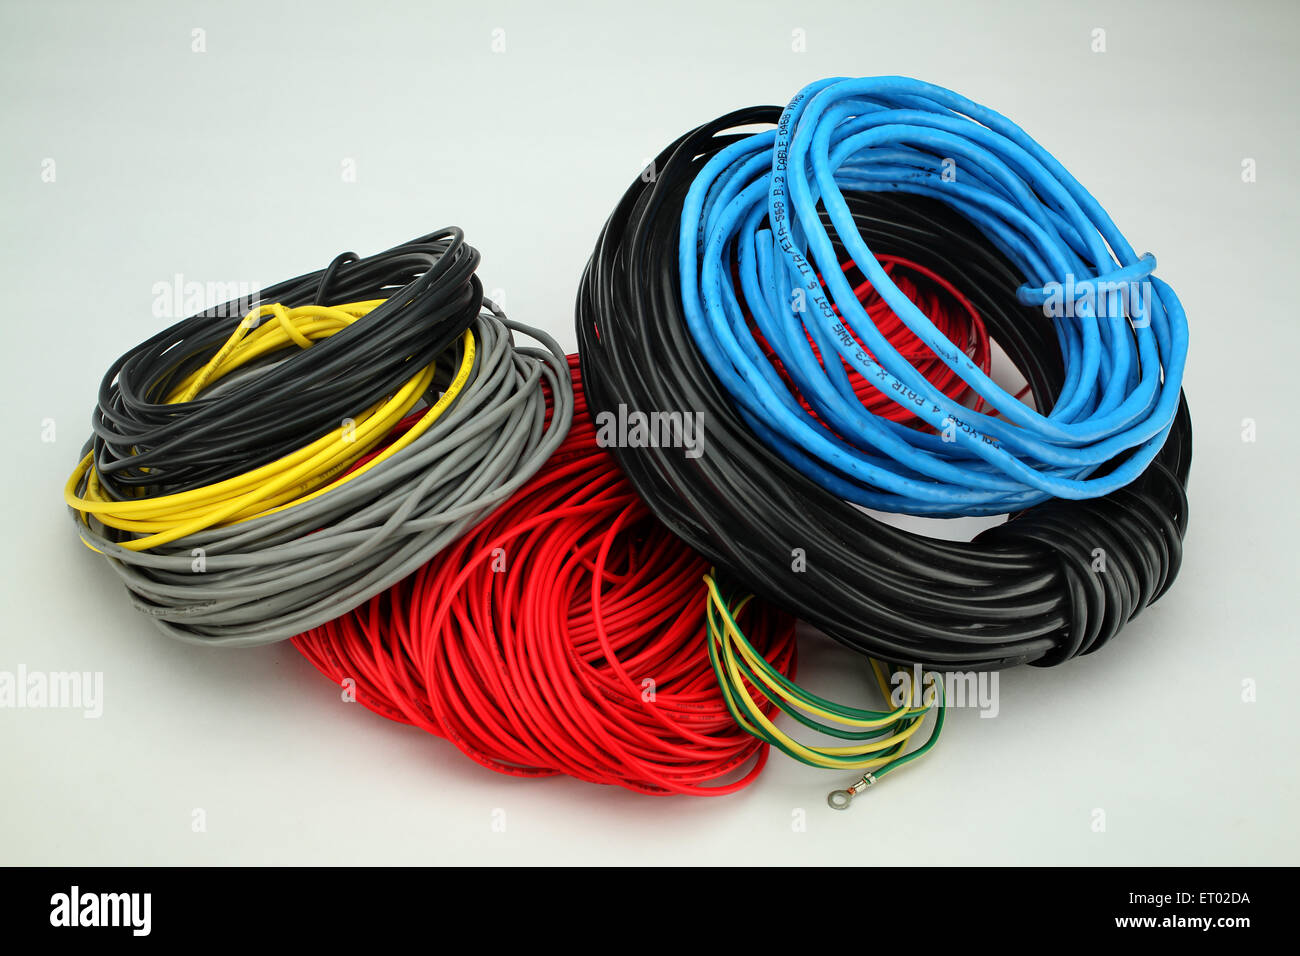 PVC Wires And Cables India Asia Stock Photo